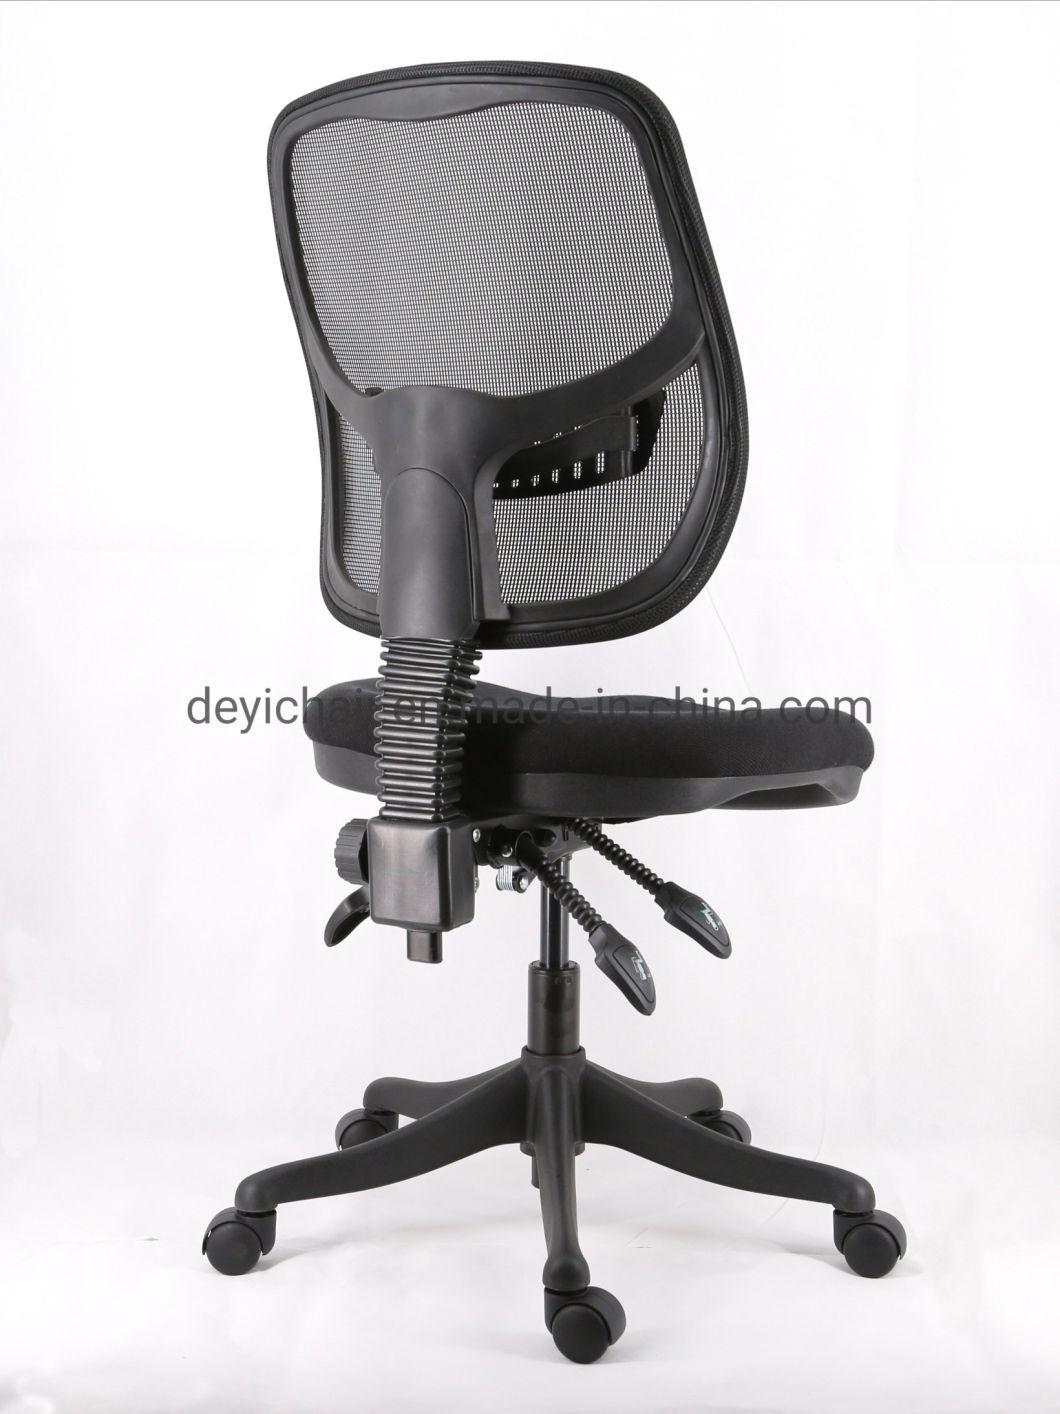 with Lumbar Support Adjustable Armrest Simple Function Seat up and Down Mechanism Nylon Base Manger Medium Backrest Office Chair